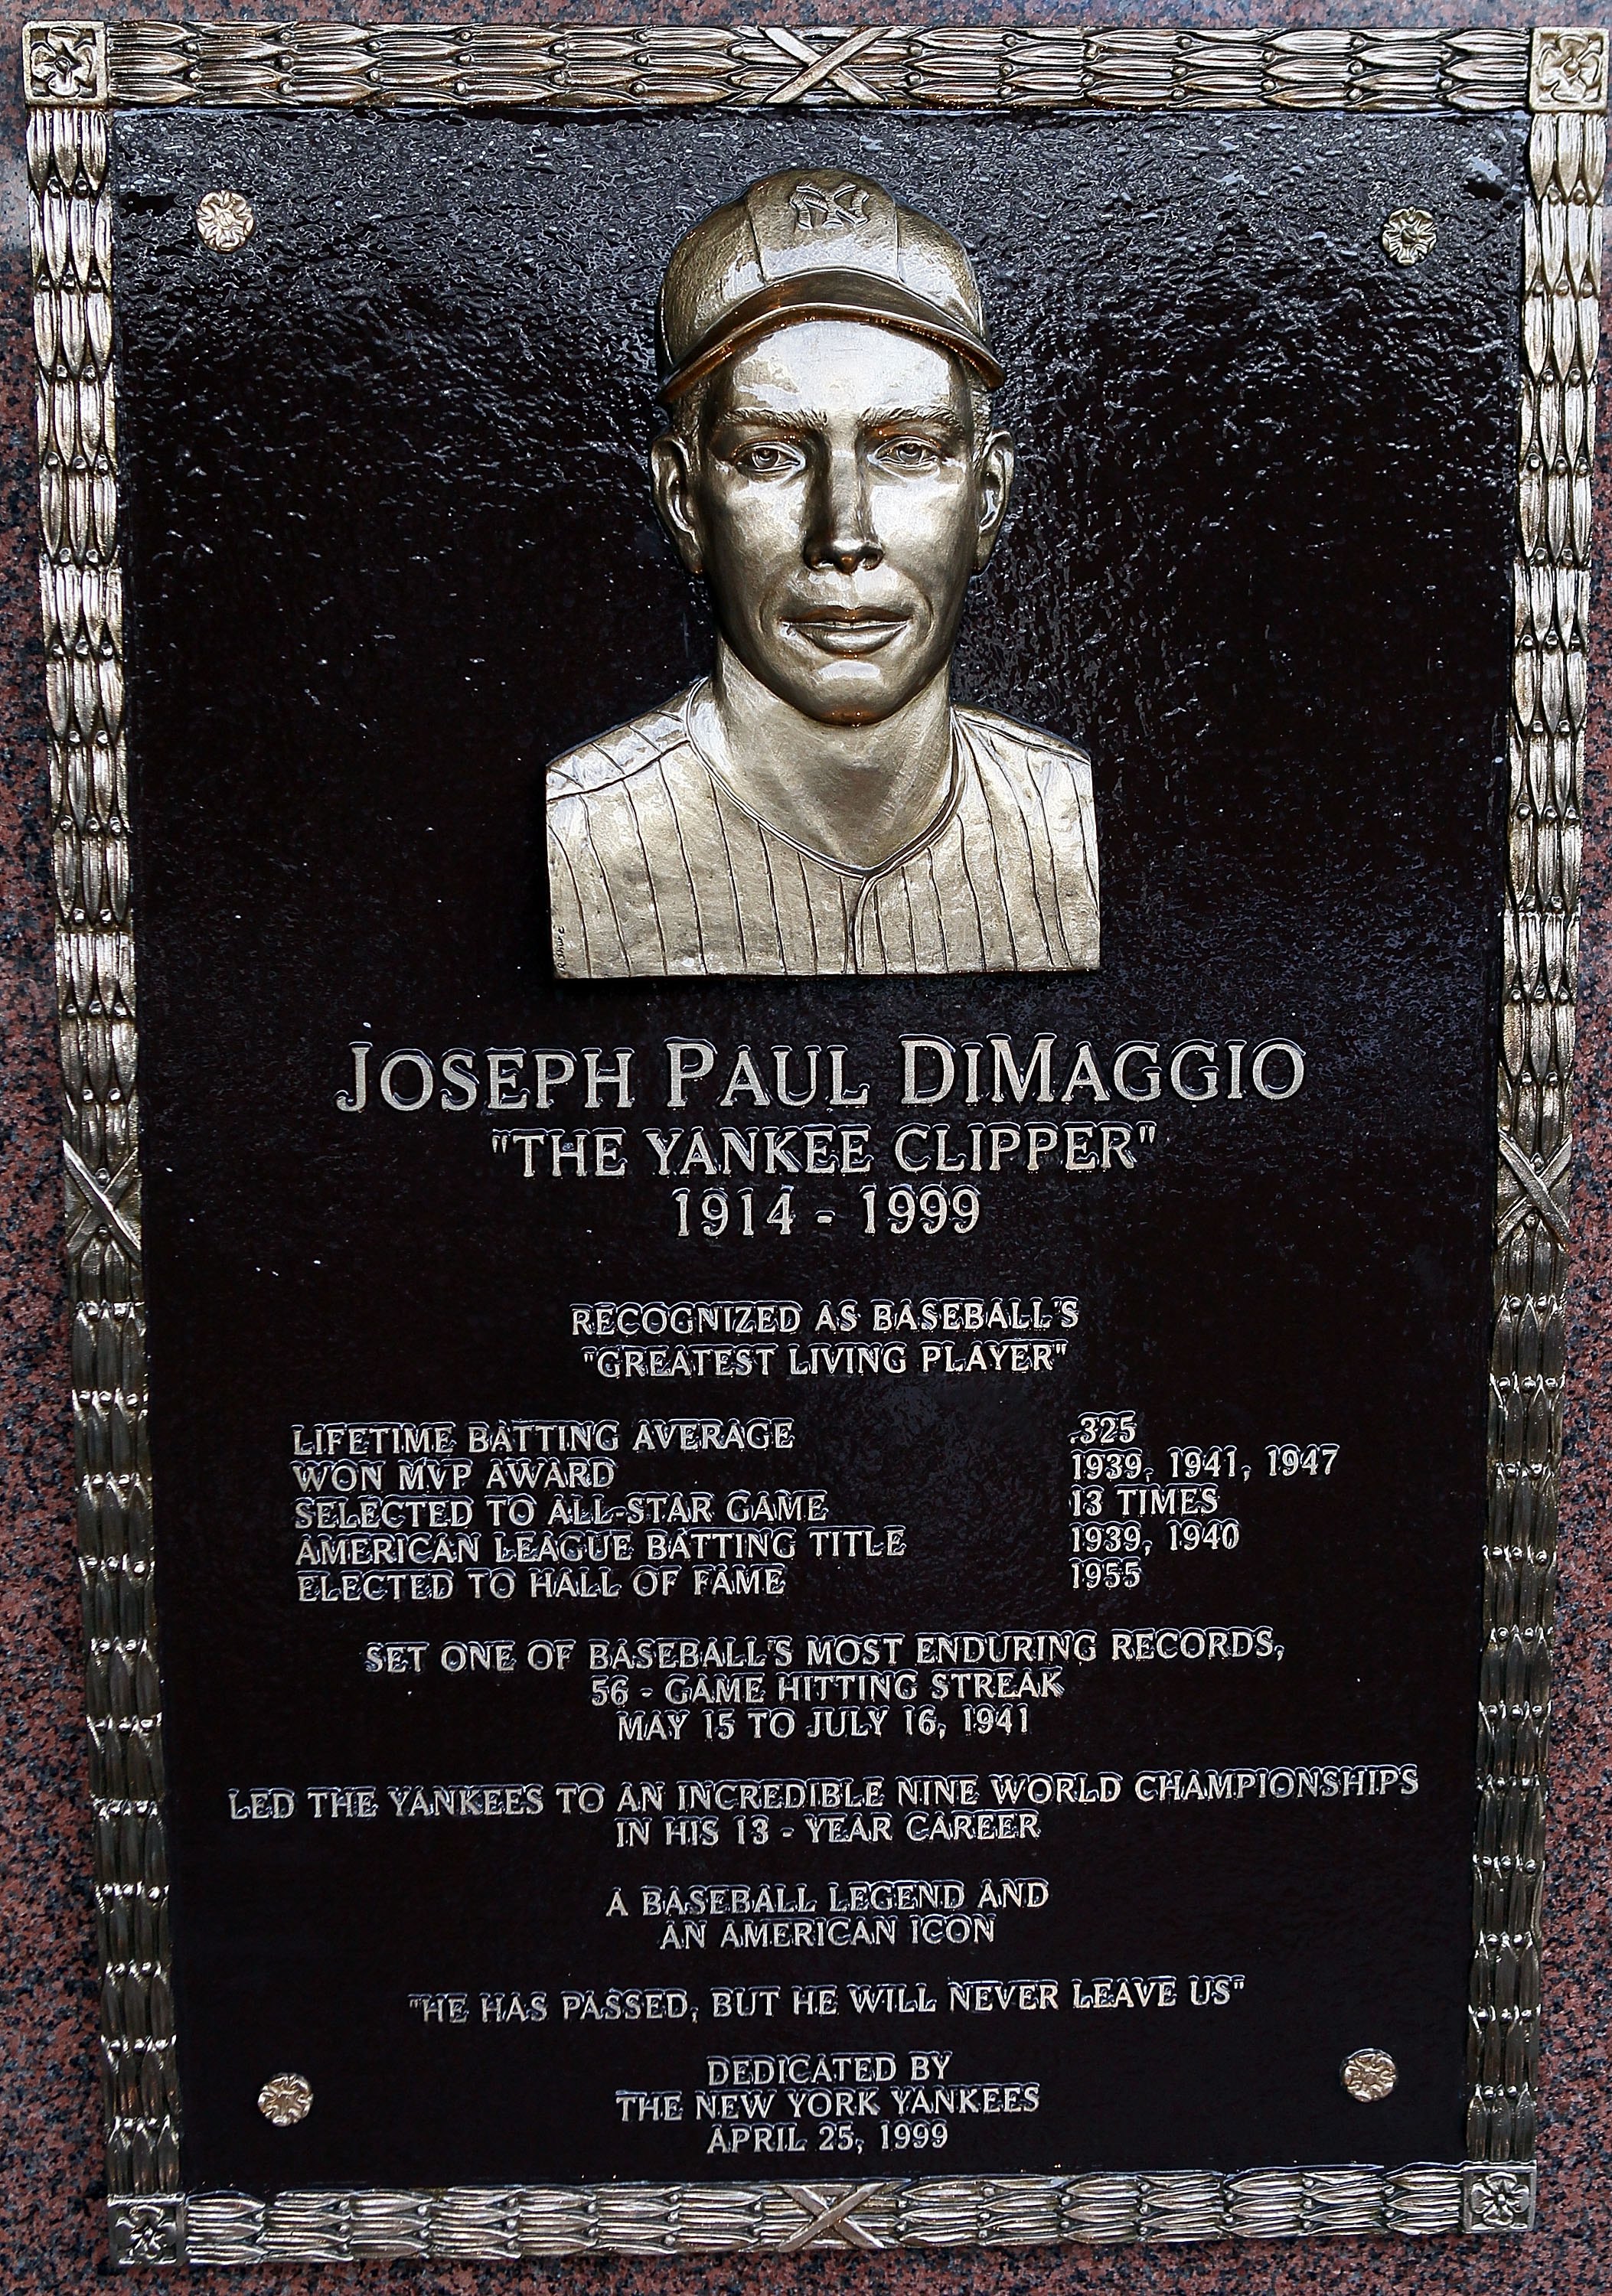 NEW YORK - MAY 02:  The plaque of Joe DiMaggio is seen in Monument Park at Yankee Stadium prior to the game between the New York Yankees and the Chicago White Sox on May 2, 2010 in the Bronx borough of New York City. The Yankees defeated the White Sox 12-